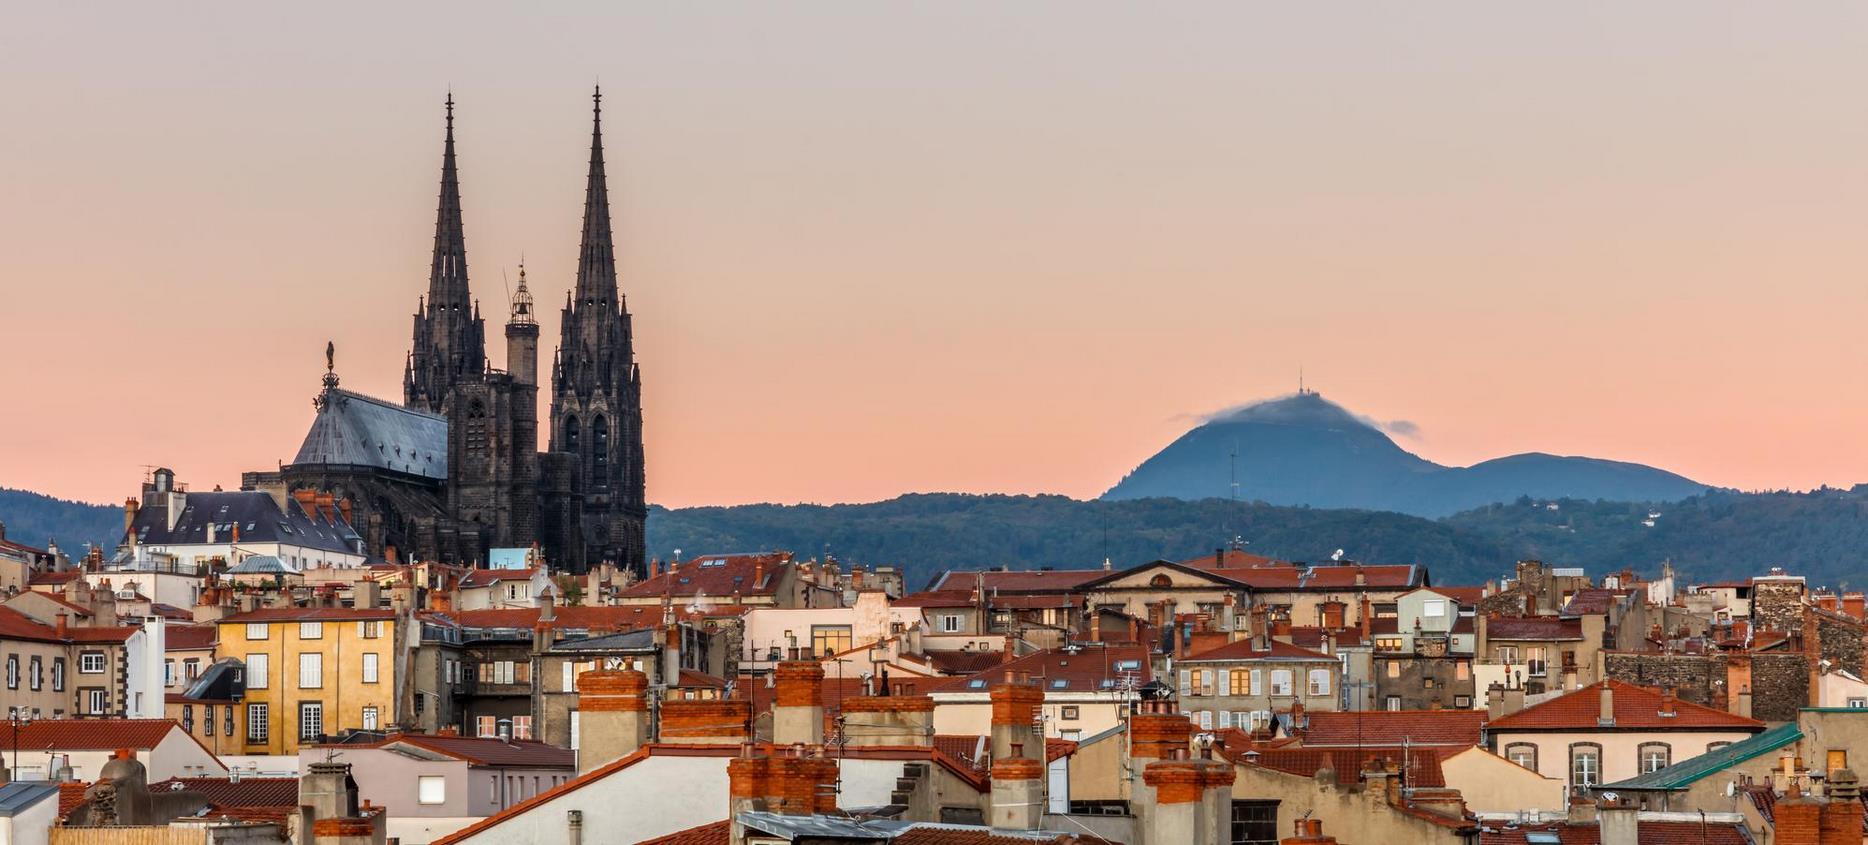 The Cathedral of Clermont Ferrand